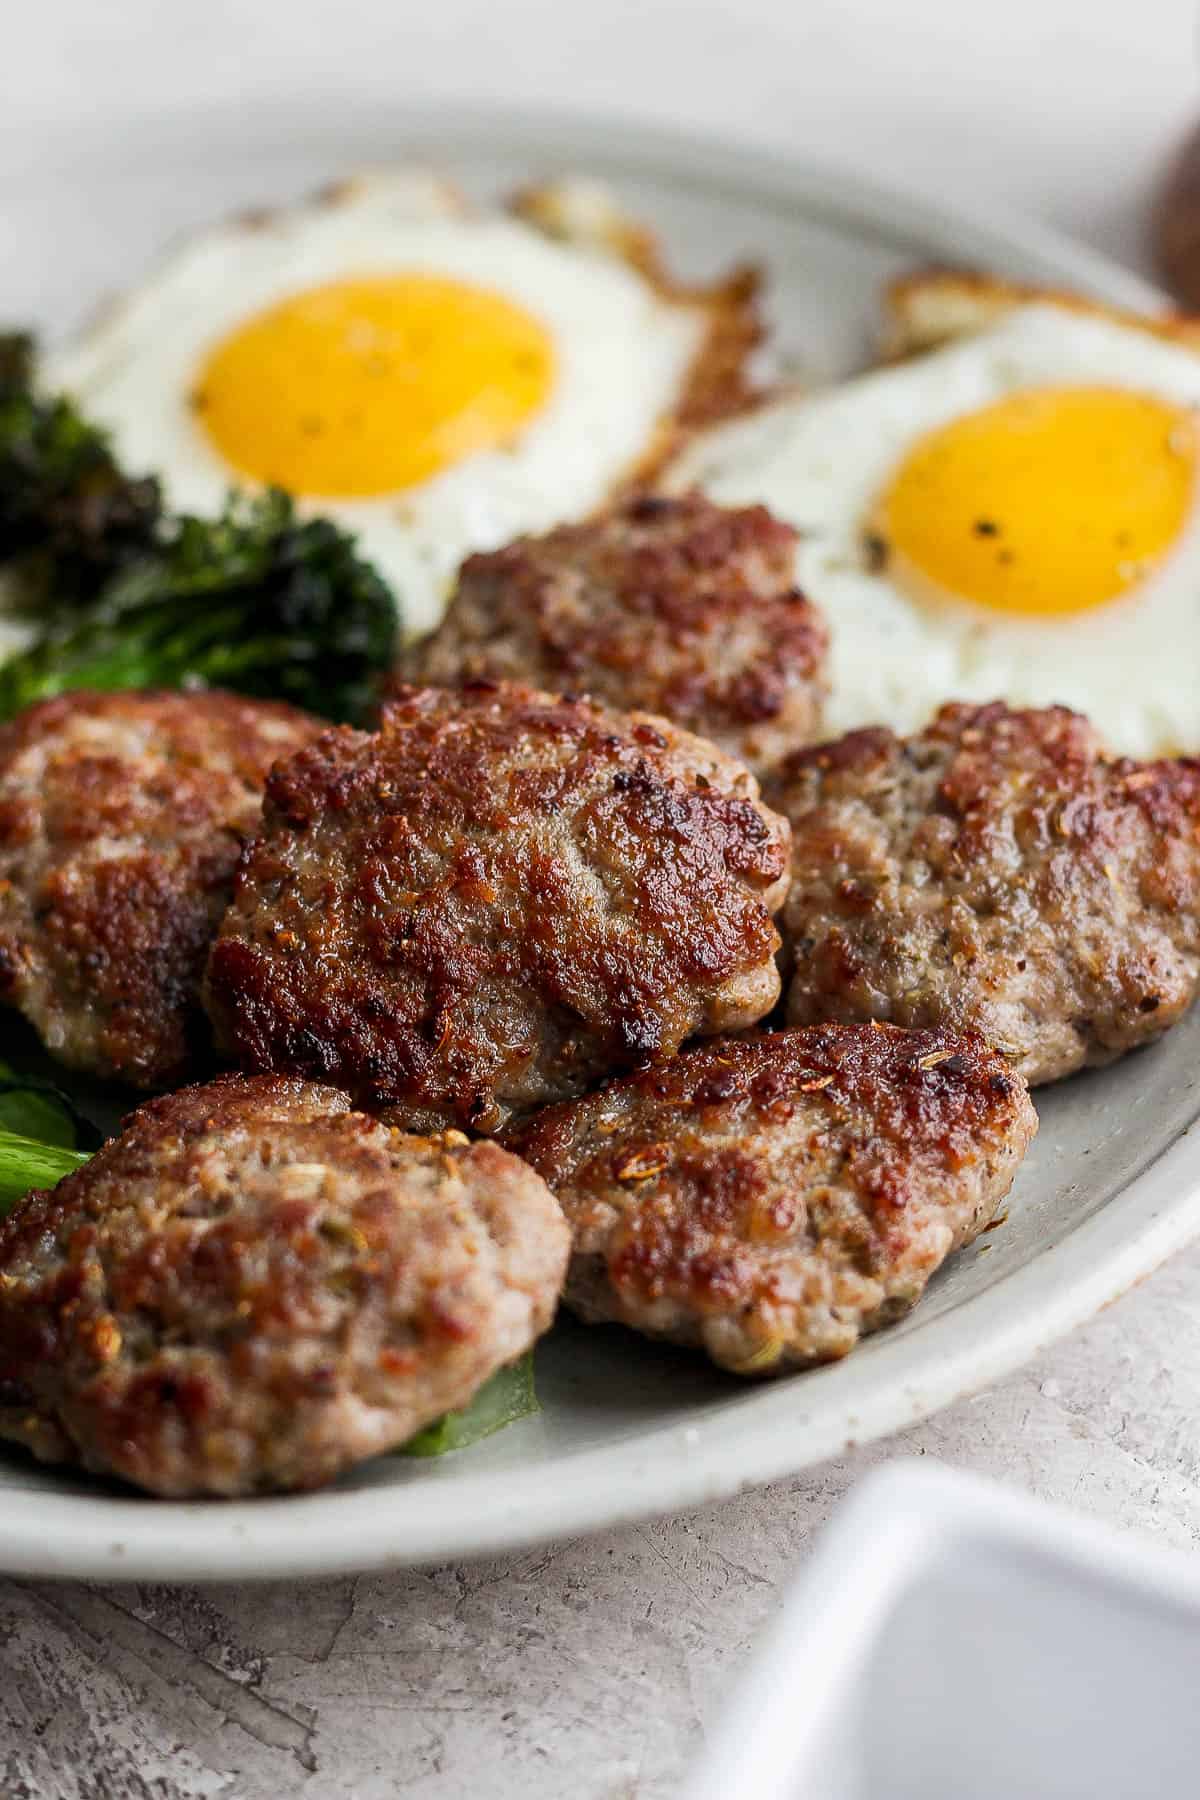 Another view of the sausage on a plate with eggs.